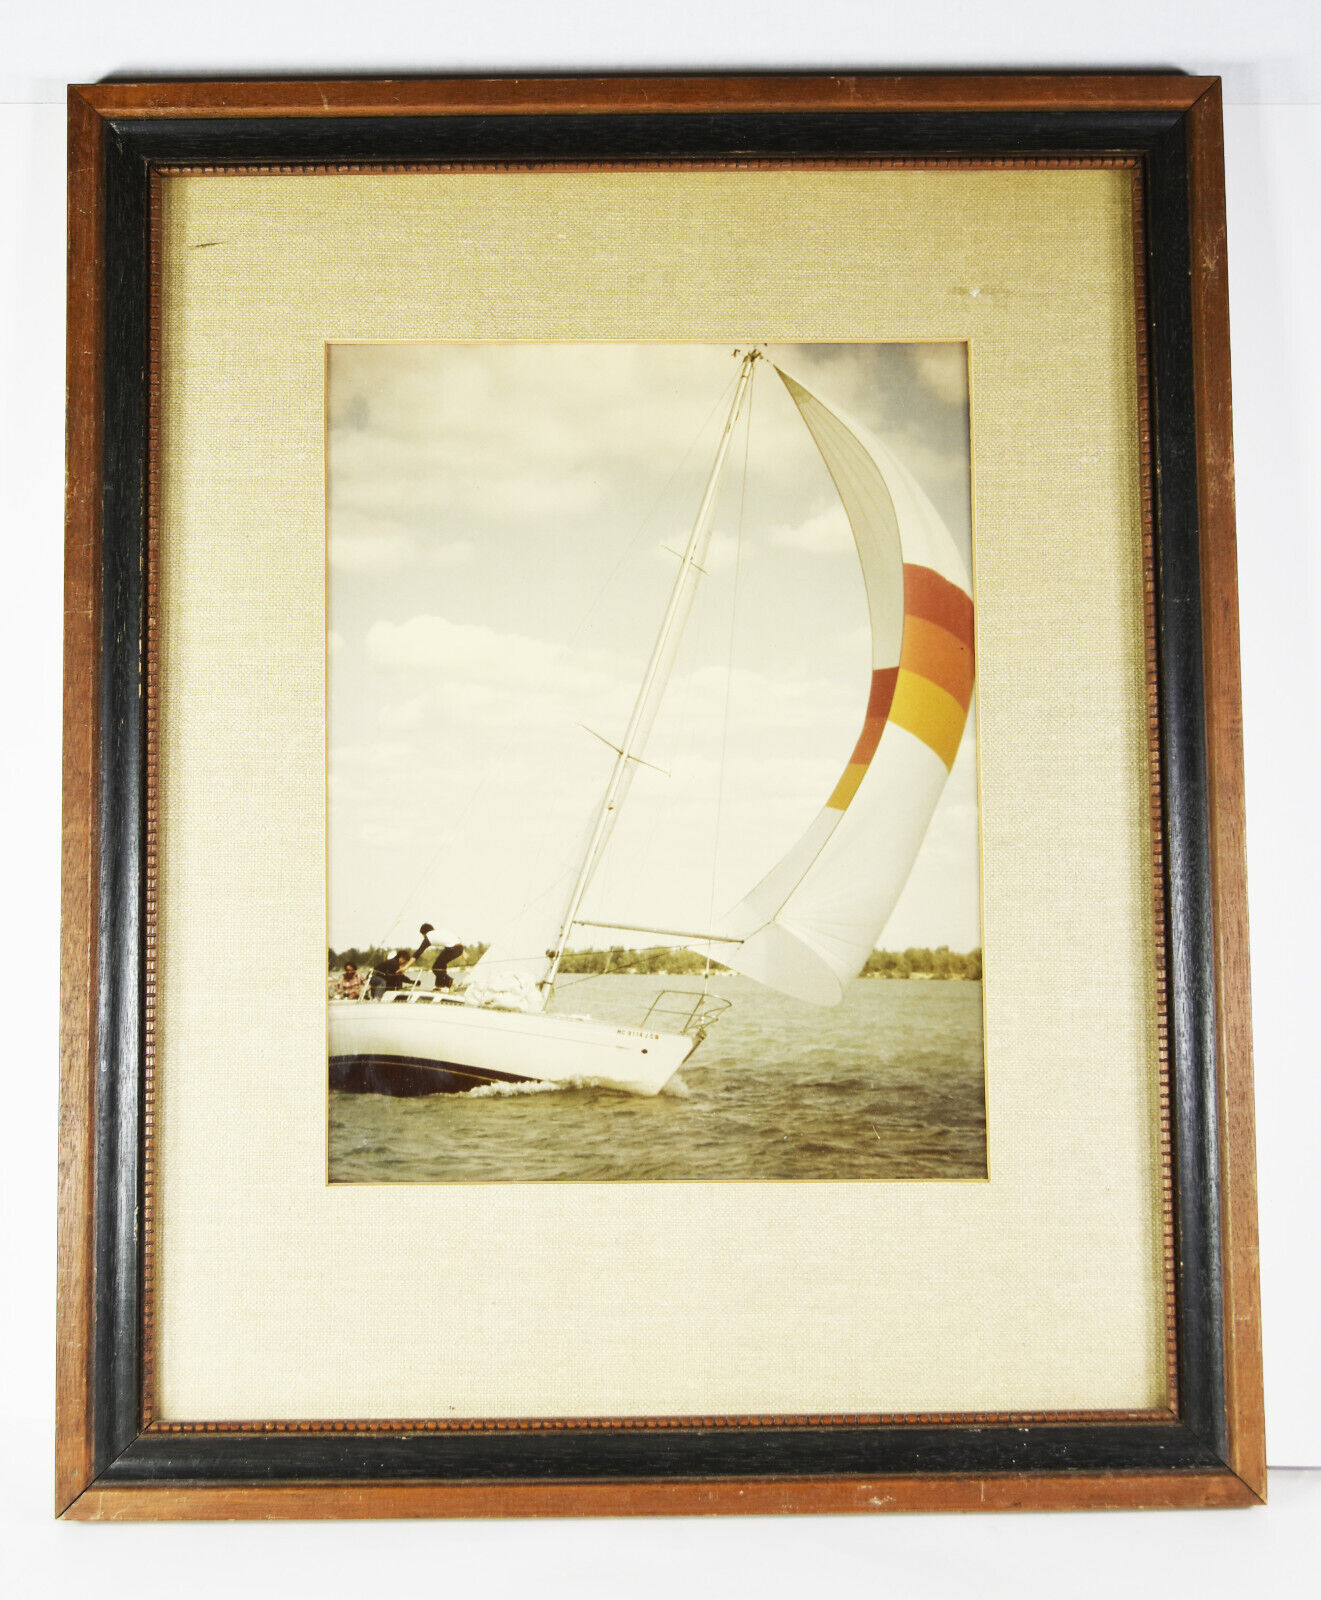 Two 1979 Original Photos Lake Erie Challenge Sailboats Yachts Race Millie Rabe